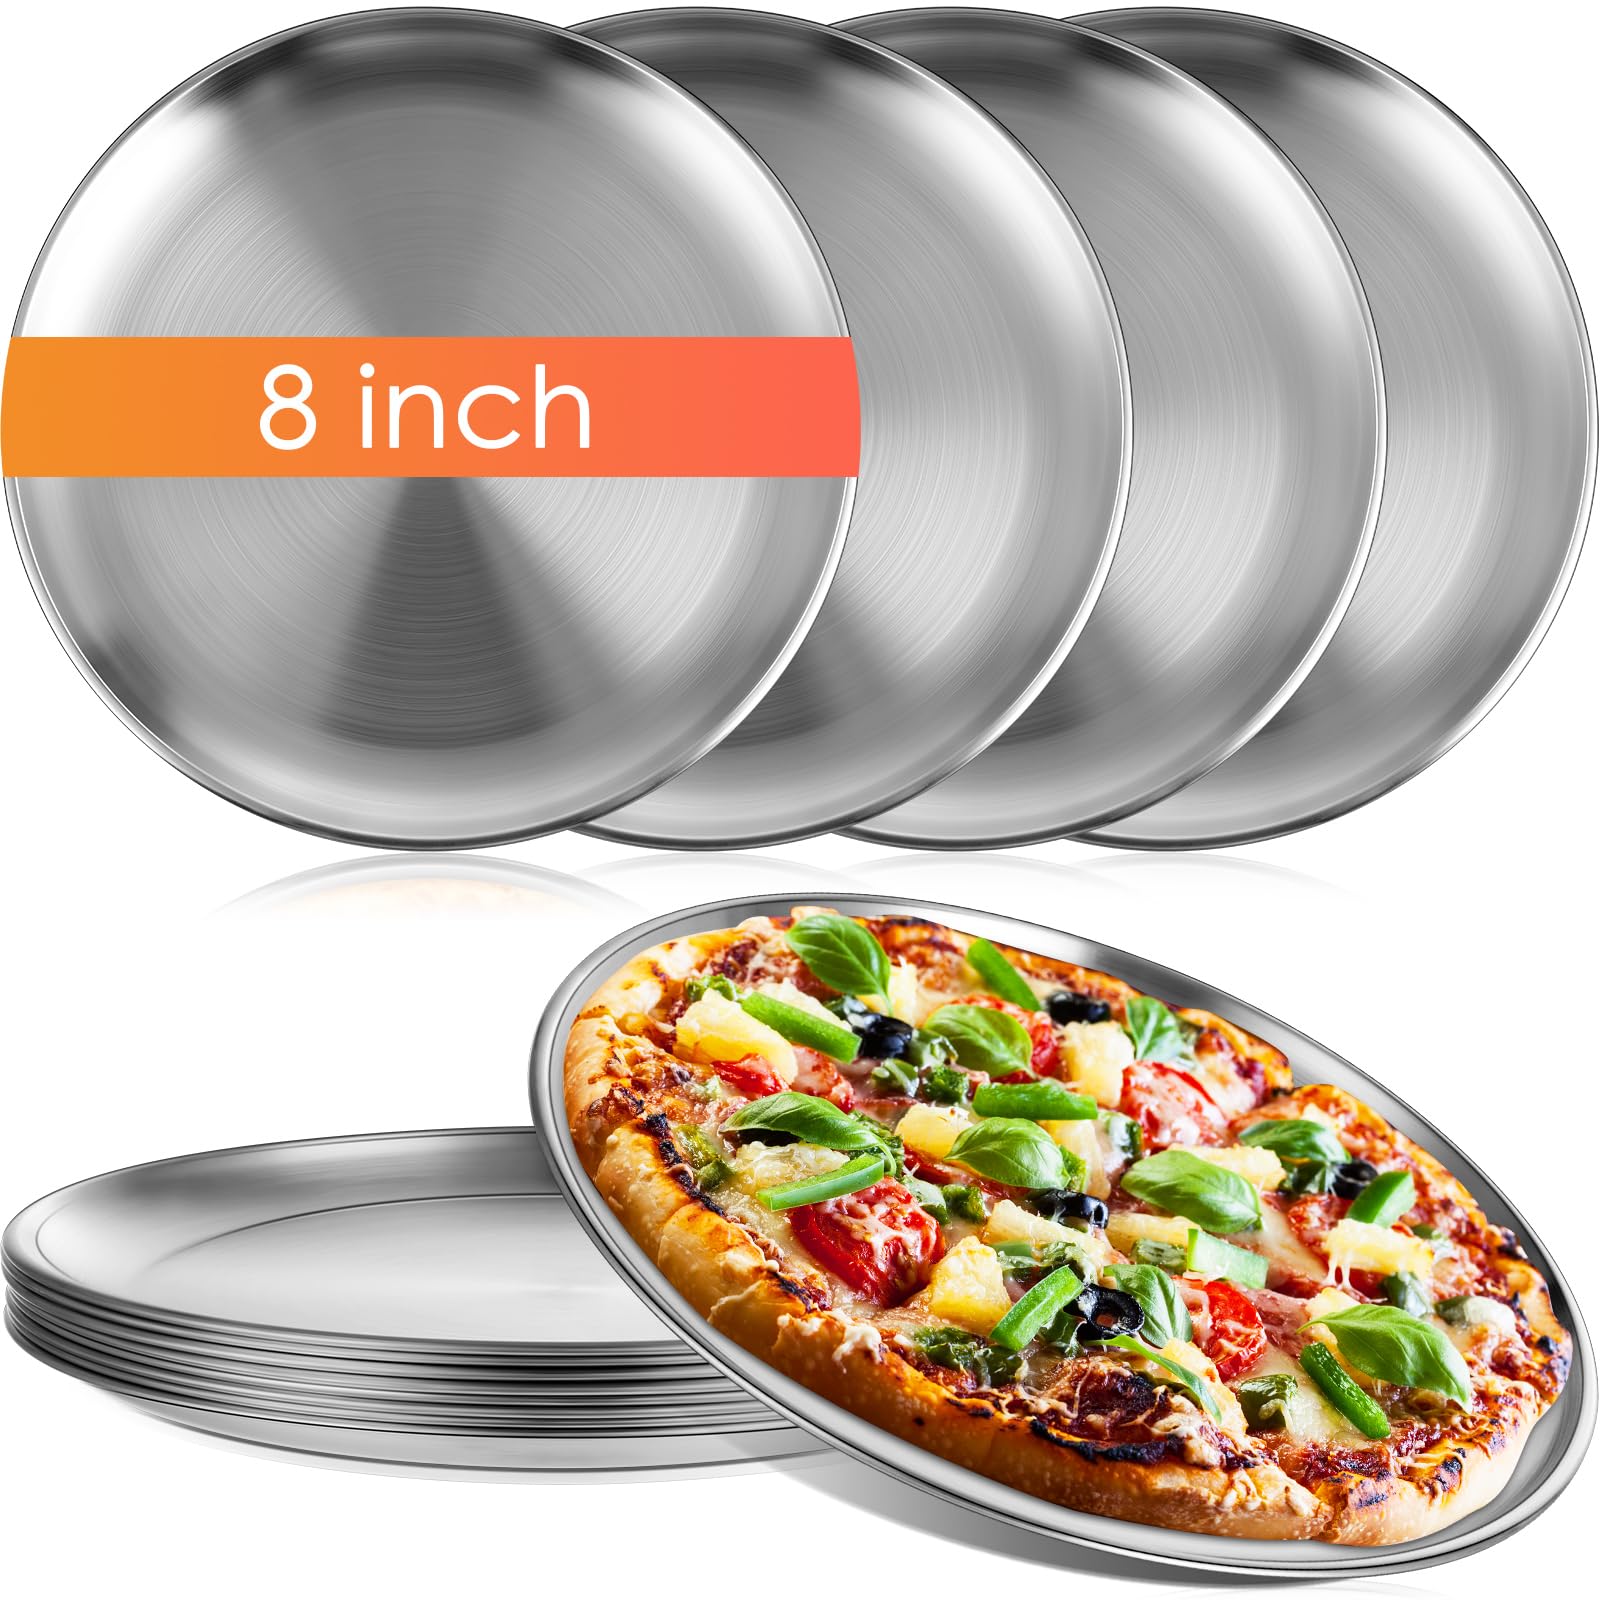 8 Pieces Pizza Pans Bulk Stainless Steel Pizza Pans Round Bakeware Pizza Trays for Oven Kitchen Baking Home Restaurant Safe Sturdy and Rust Free Reusable Pizza Baking Sheets Dishes Dinner (8 Inch)